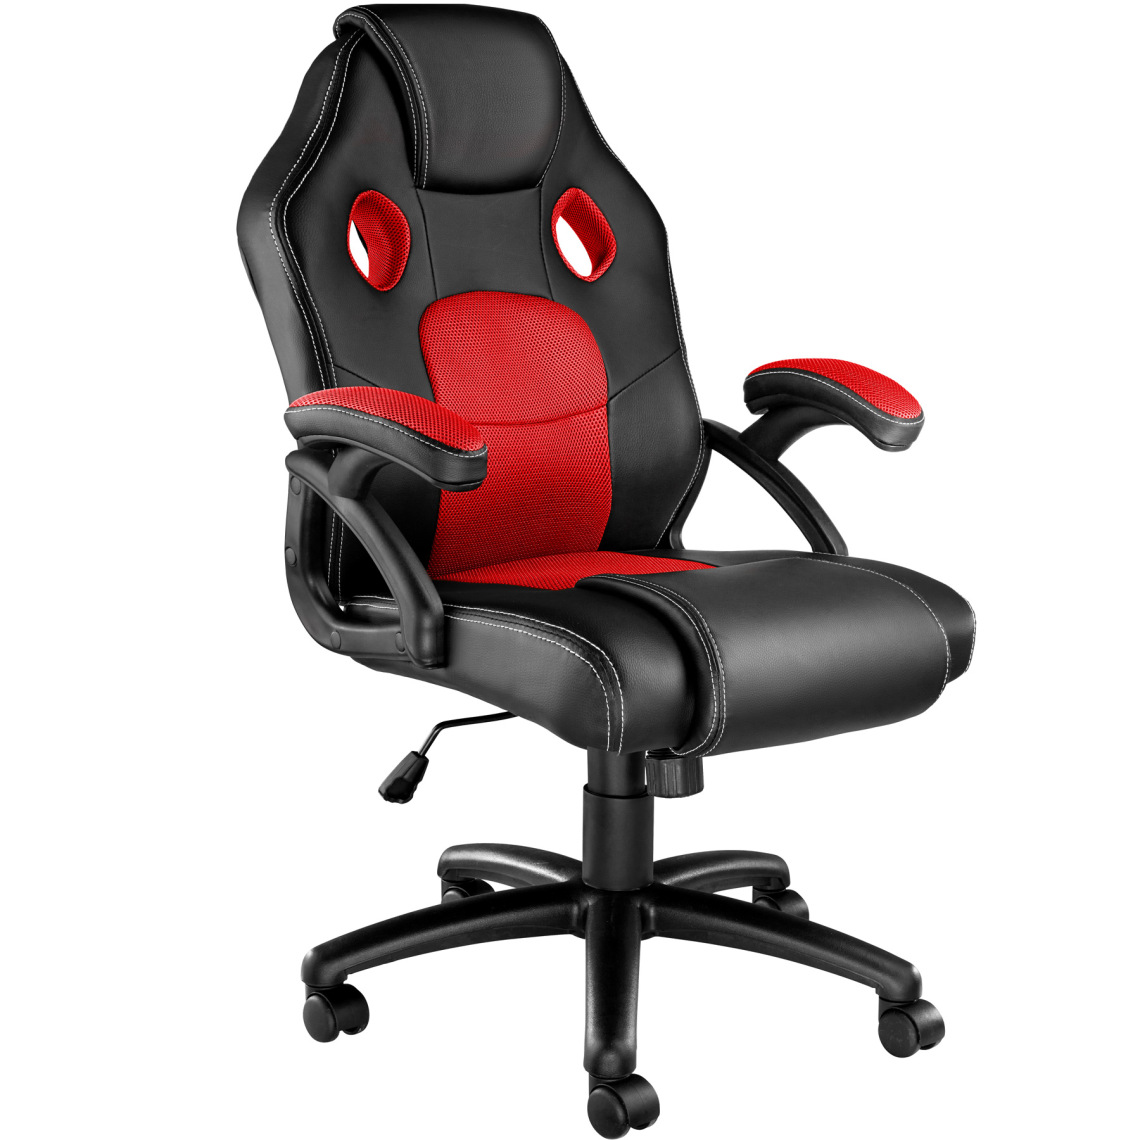 Tectake - Chaise gamer MIKE - noir/rouge - Chaises